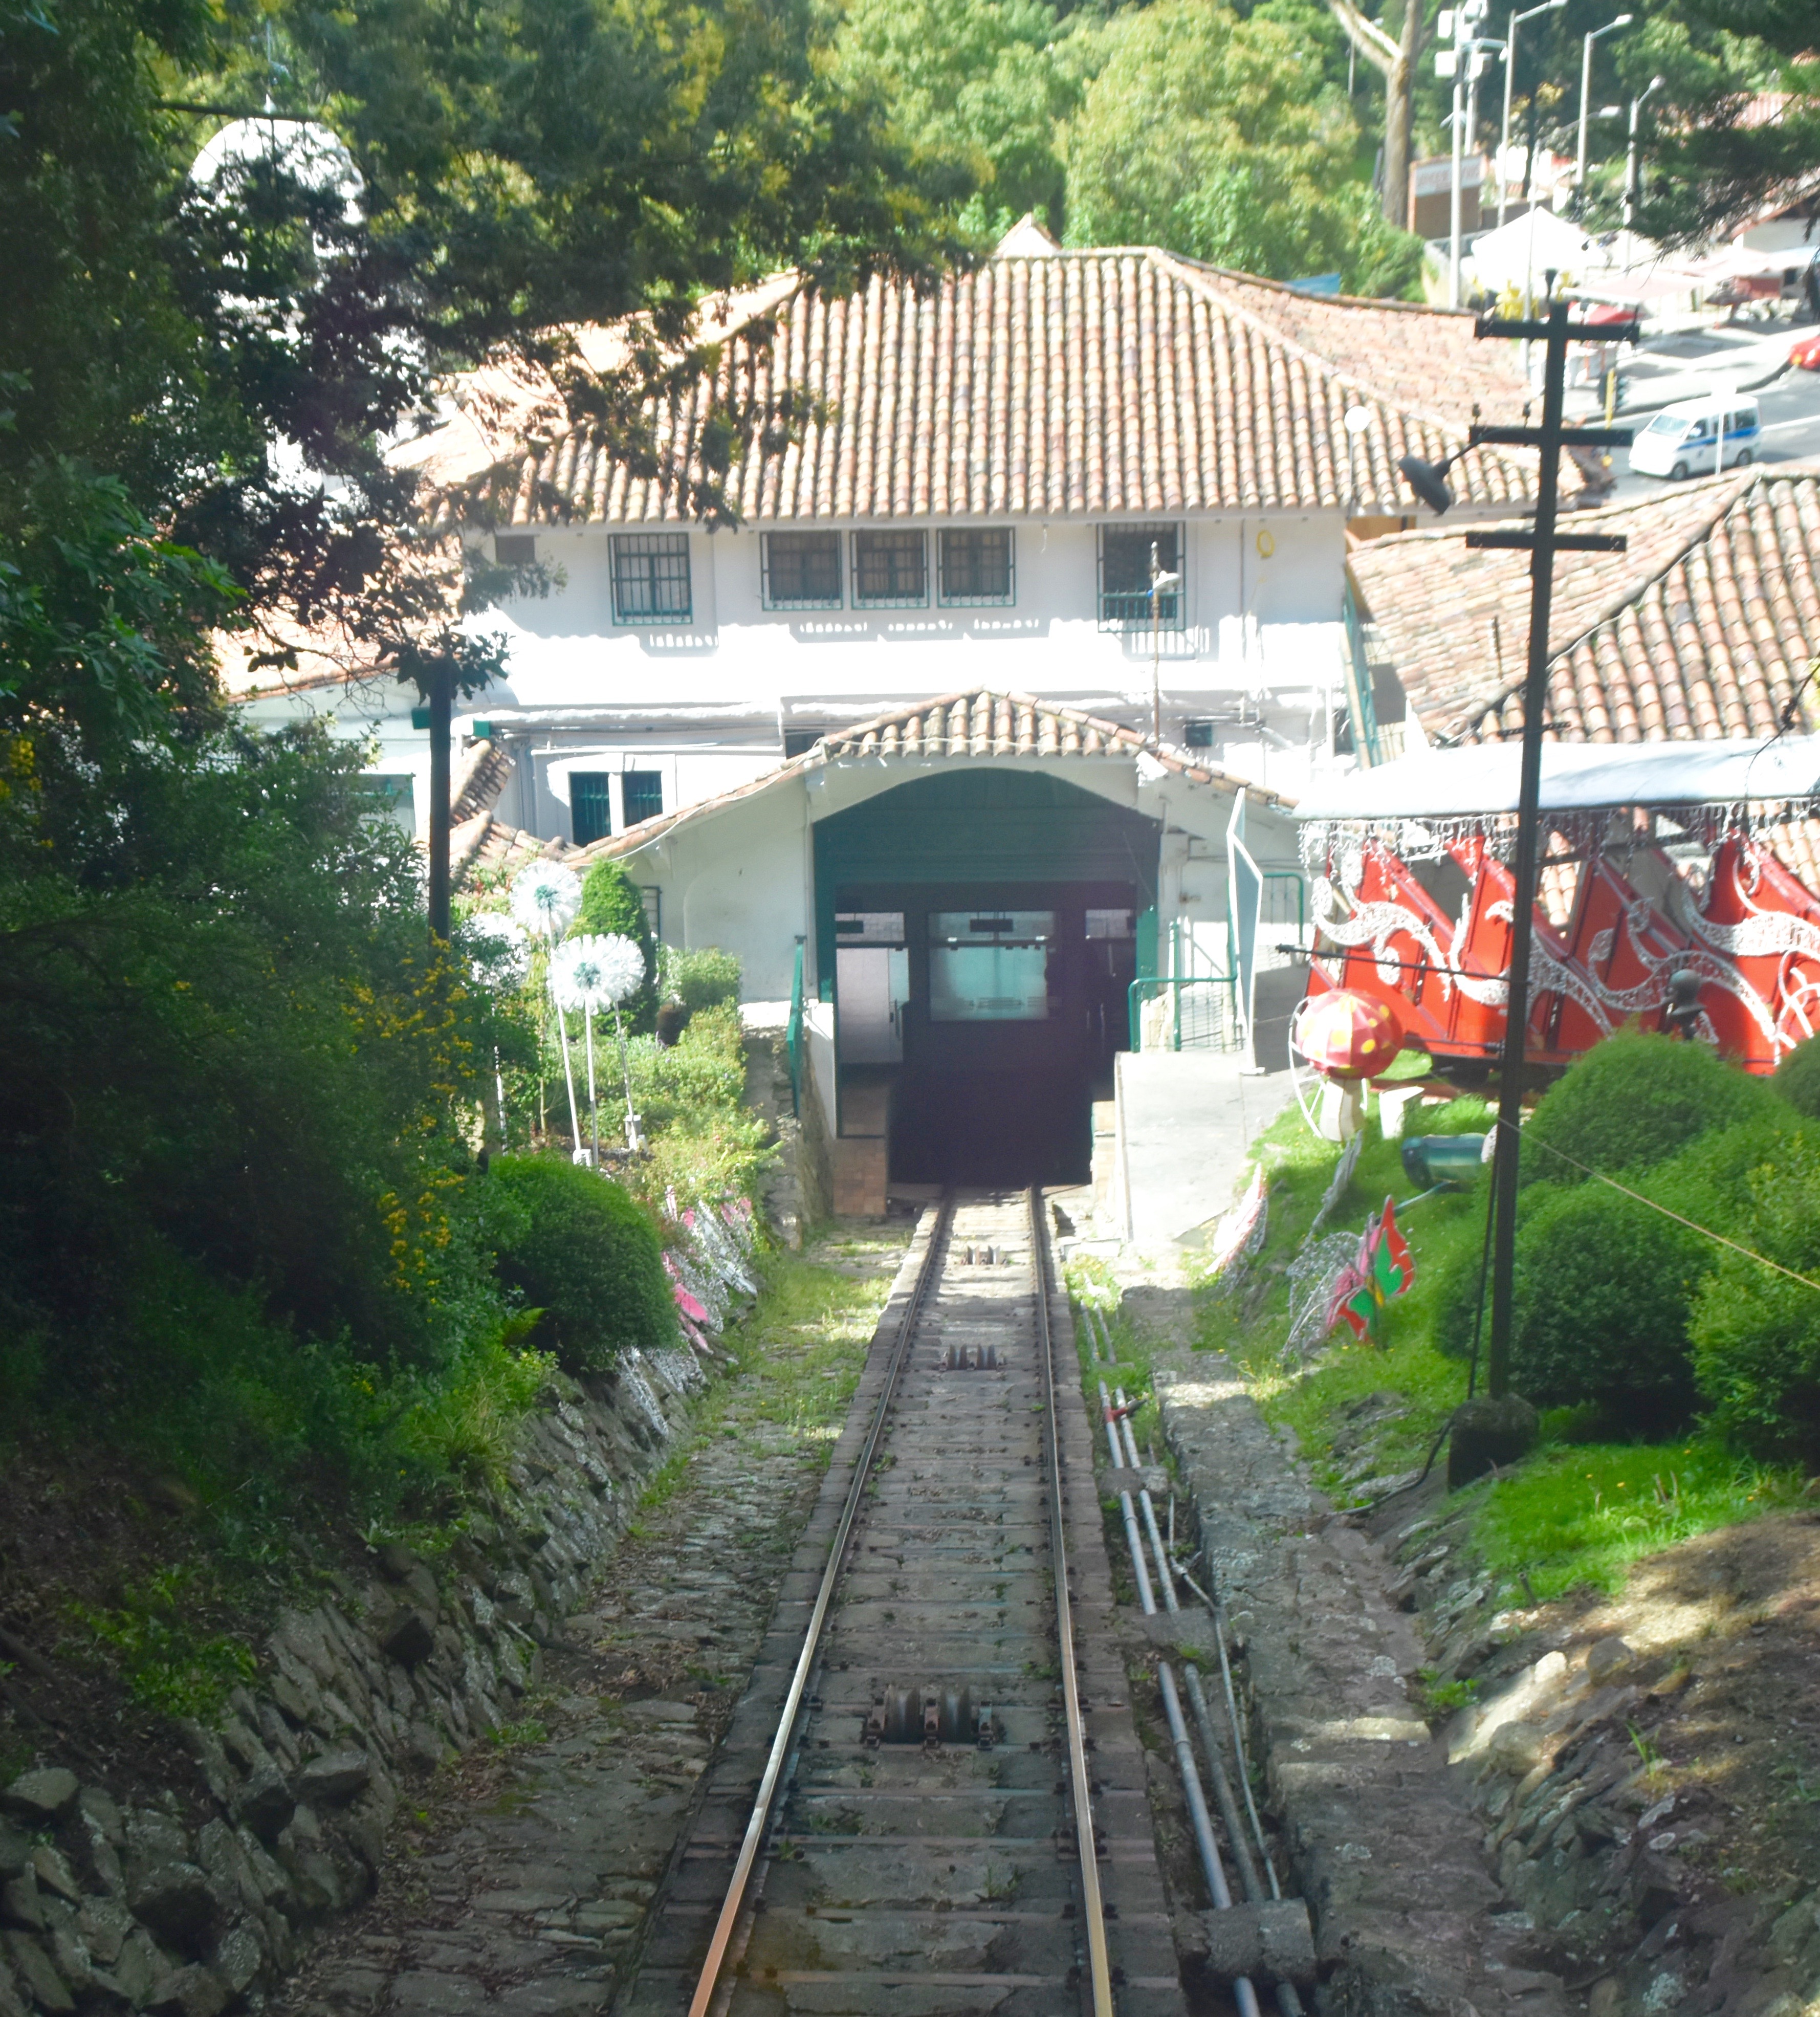 Leaving the Monserrate Funicular Station